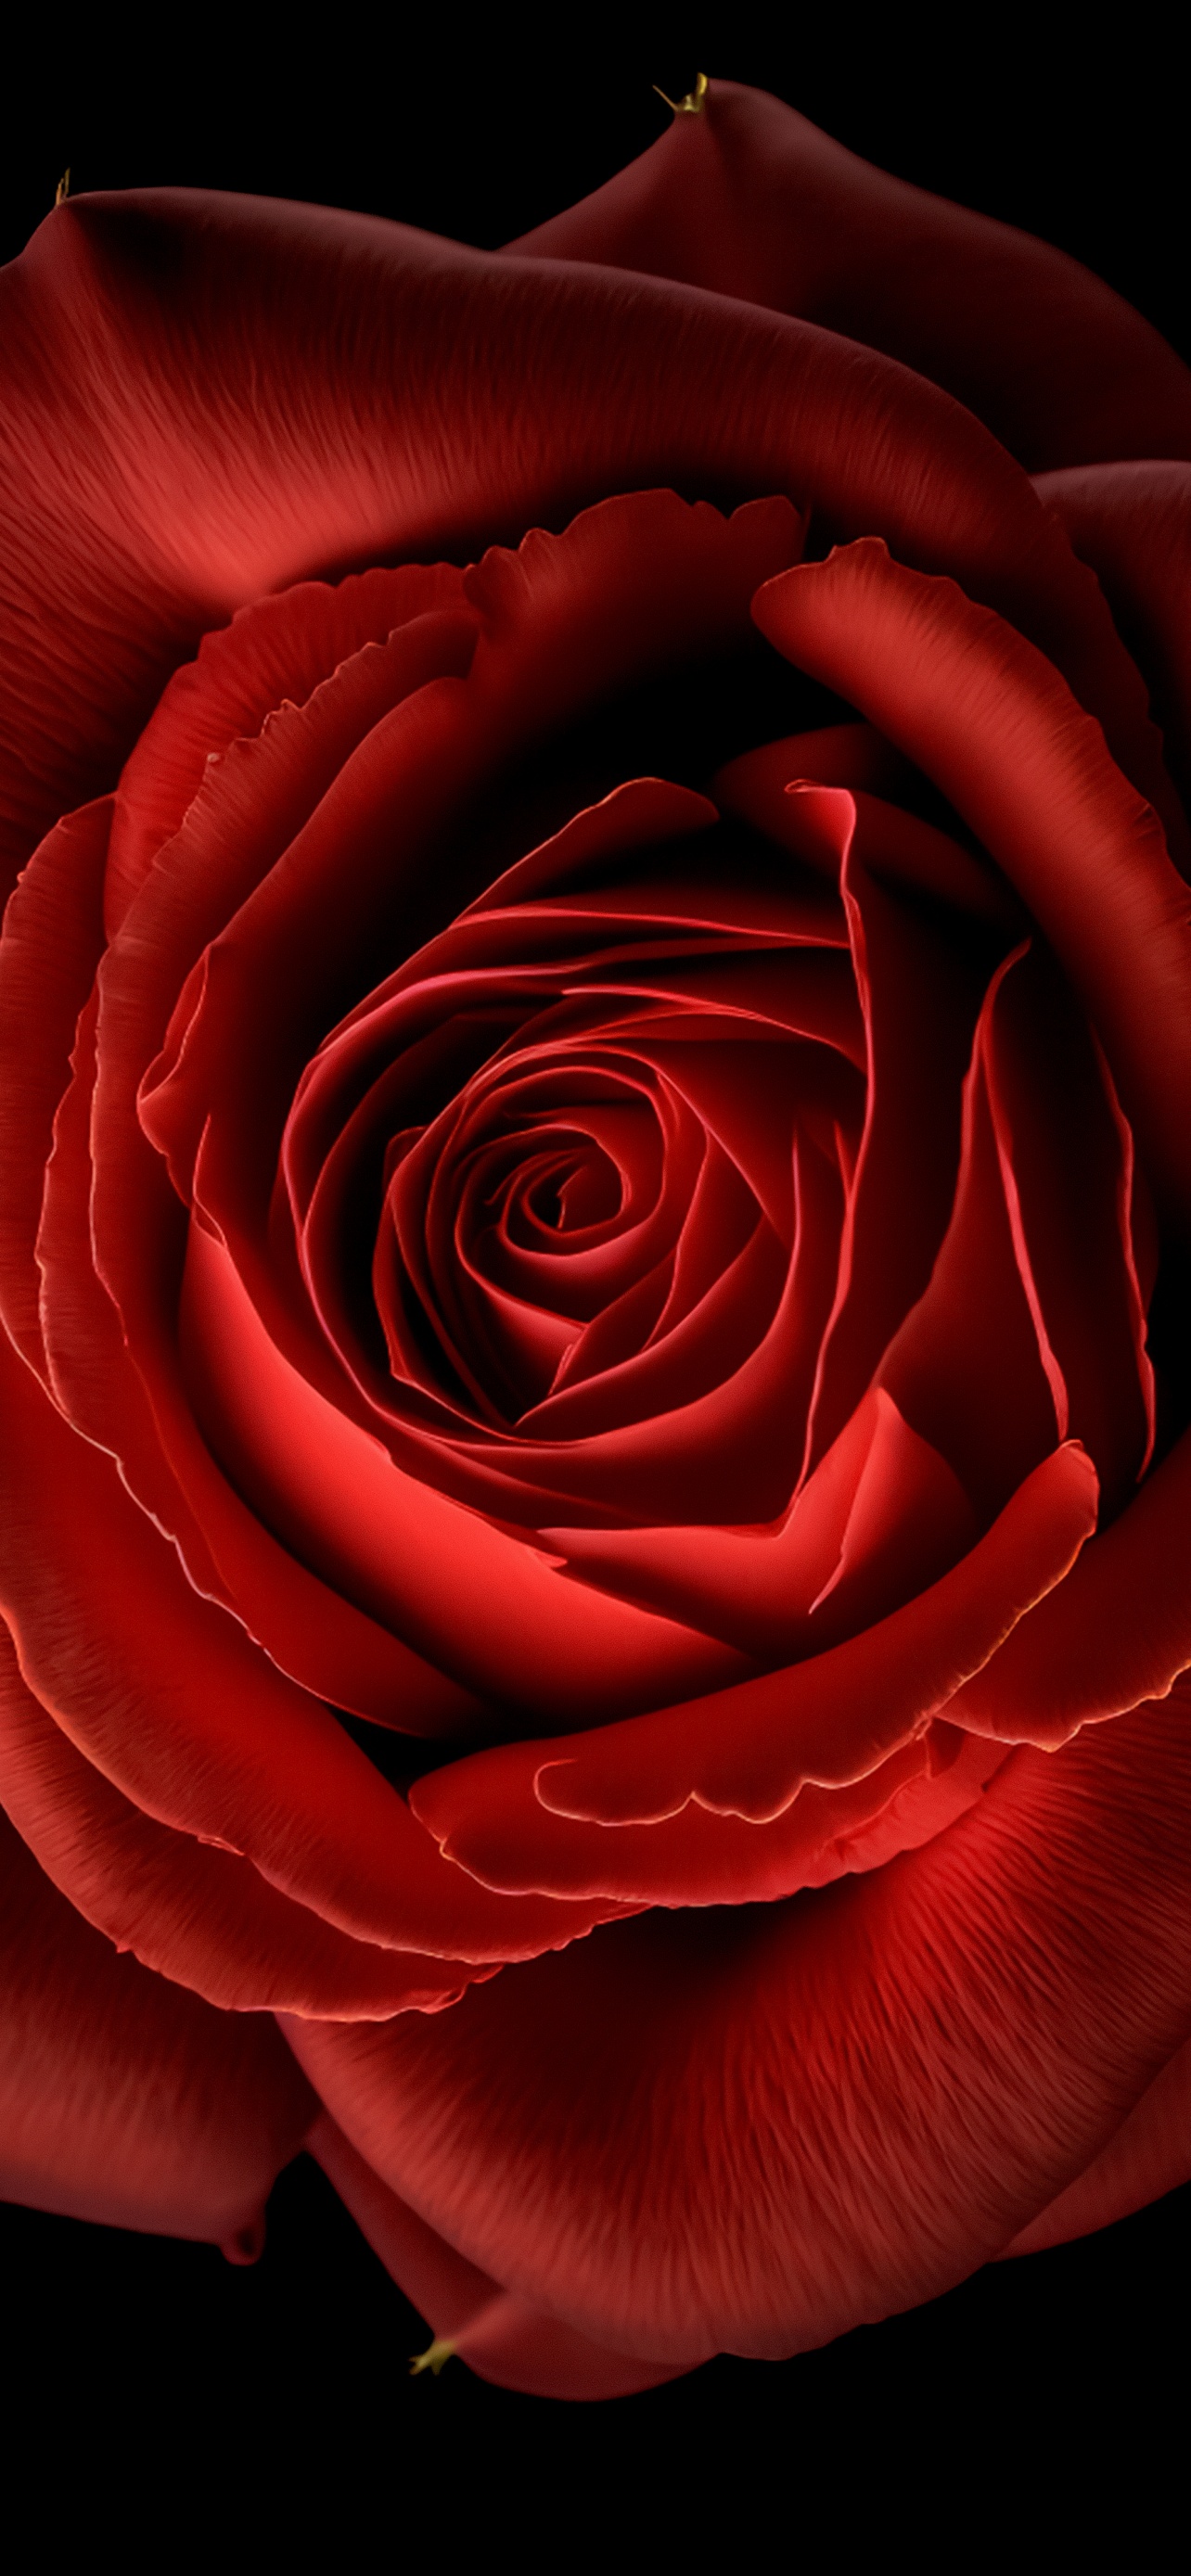 Red Rose IPhone Wallpaper  IPhone Wallpapers  iPhone Wallpapers